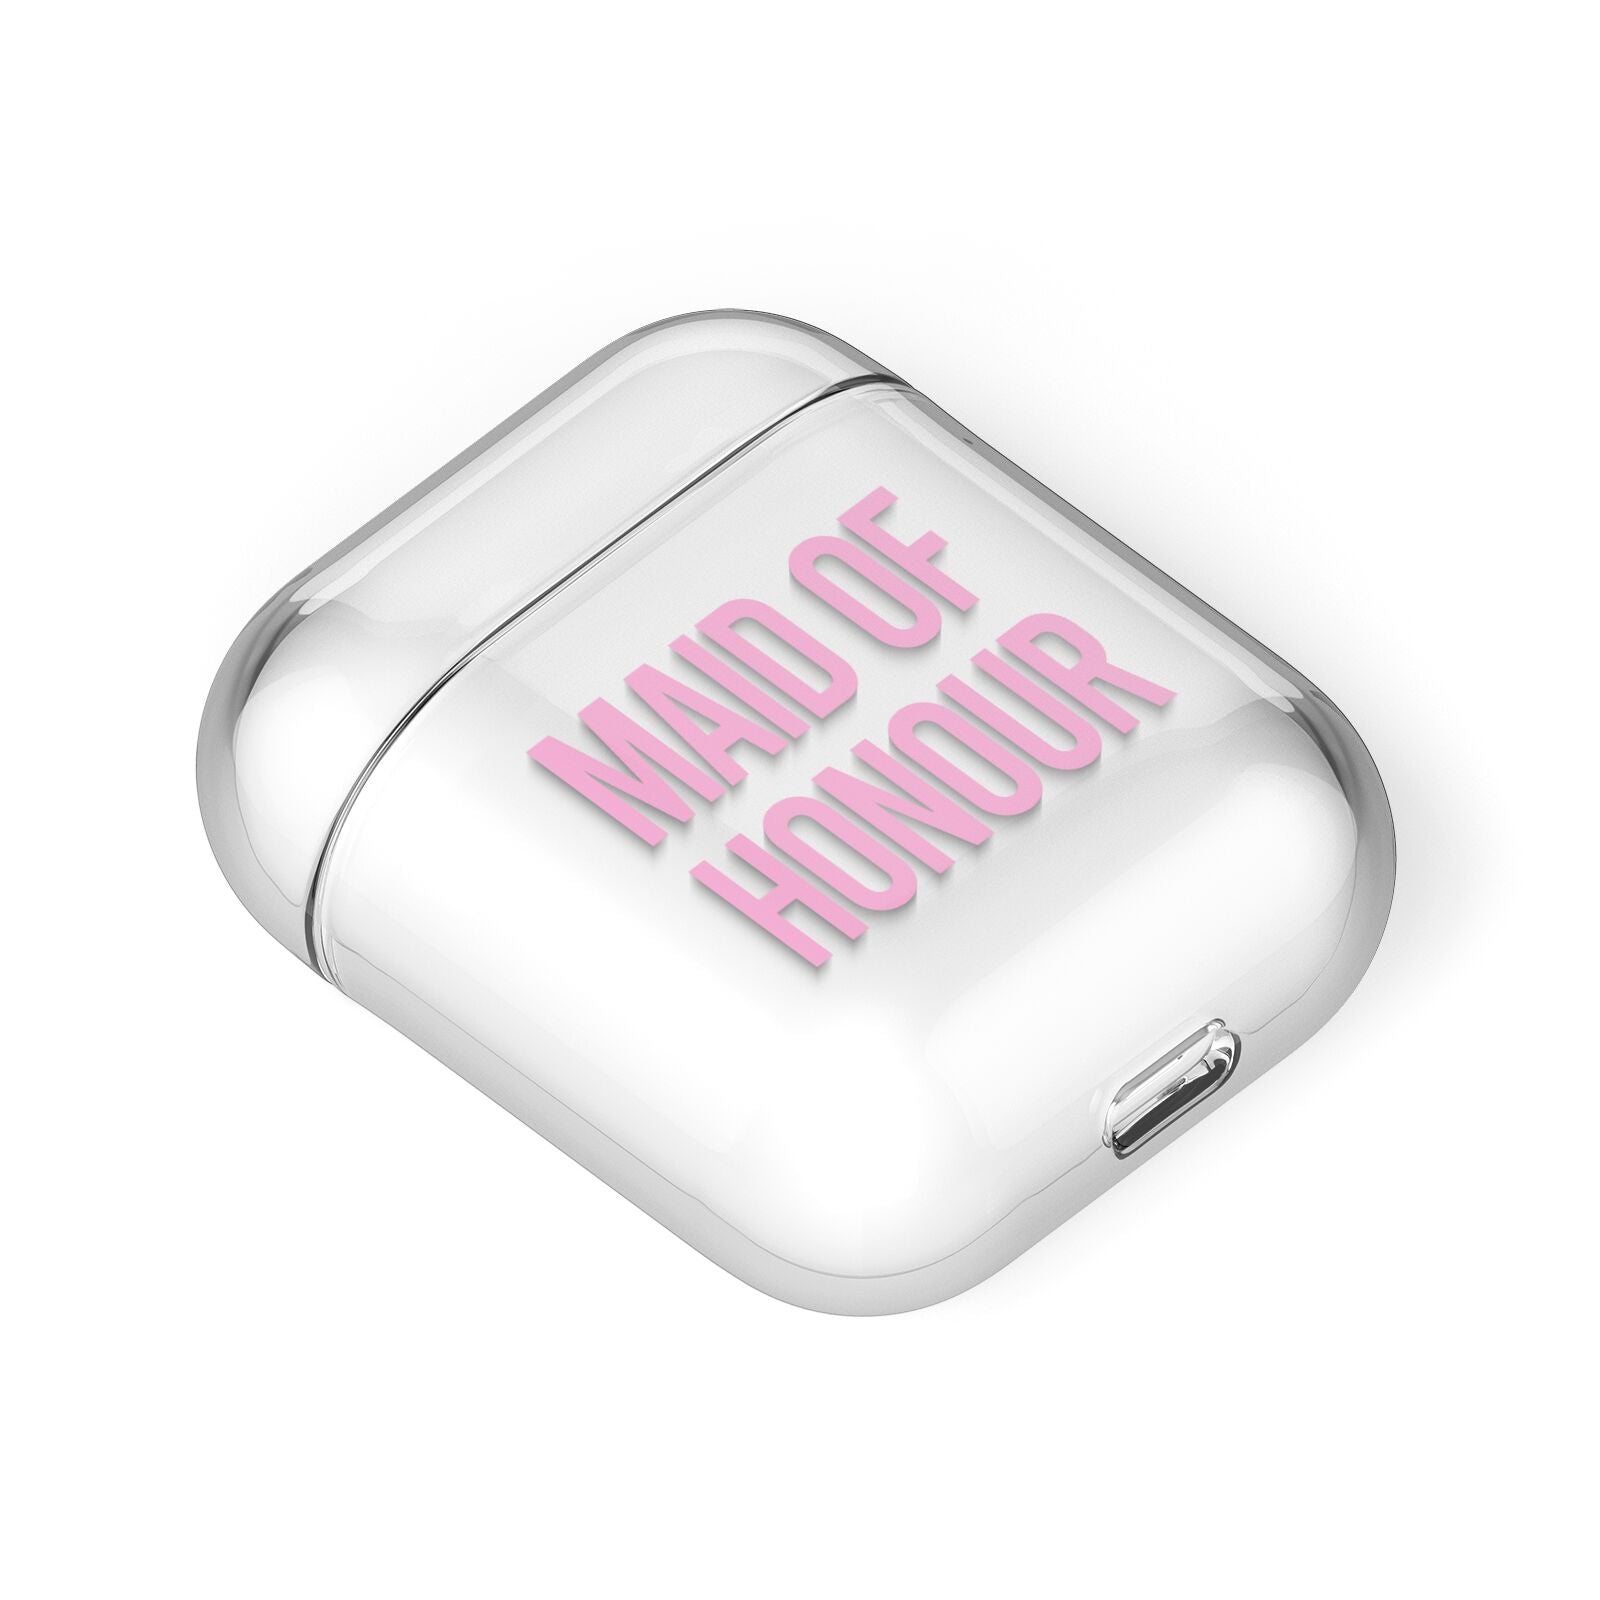 Maid of Honour AirPods Case Laid Flat